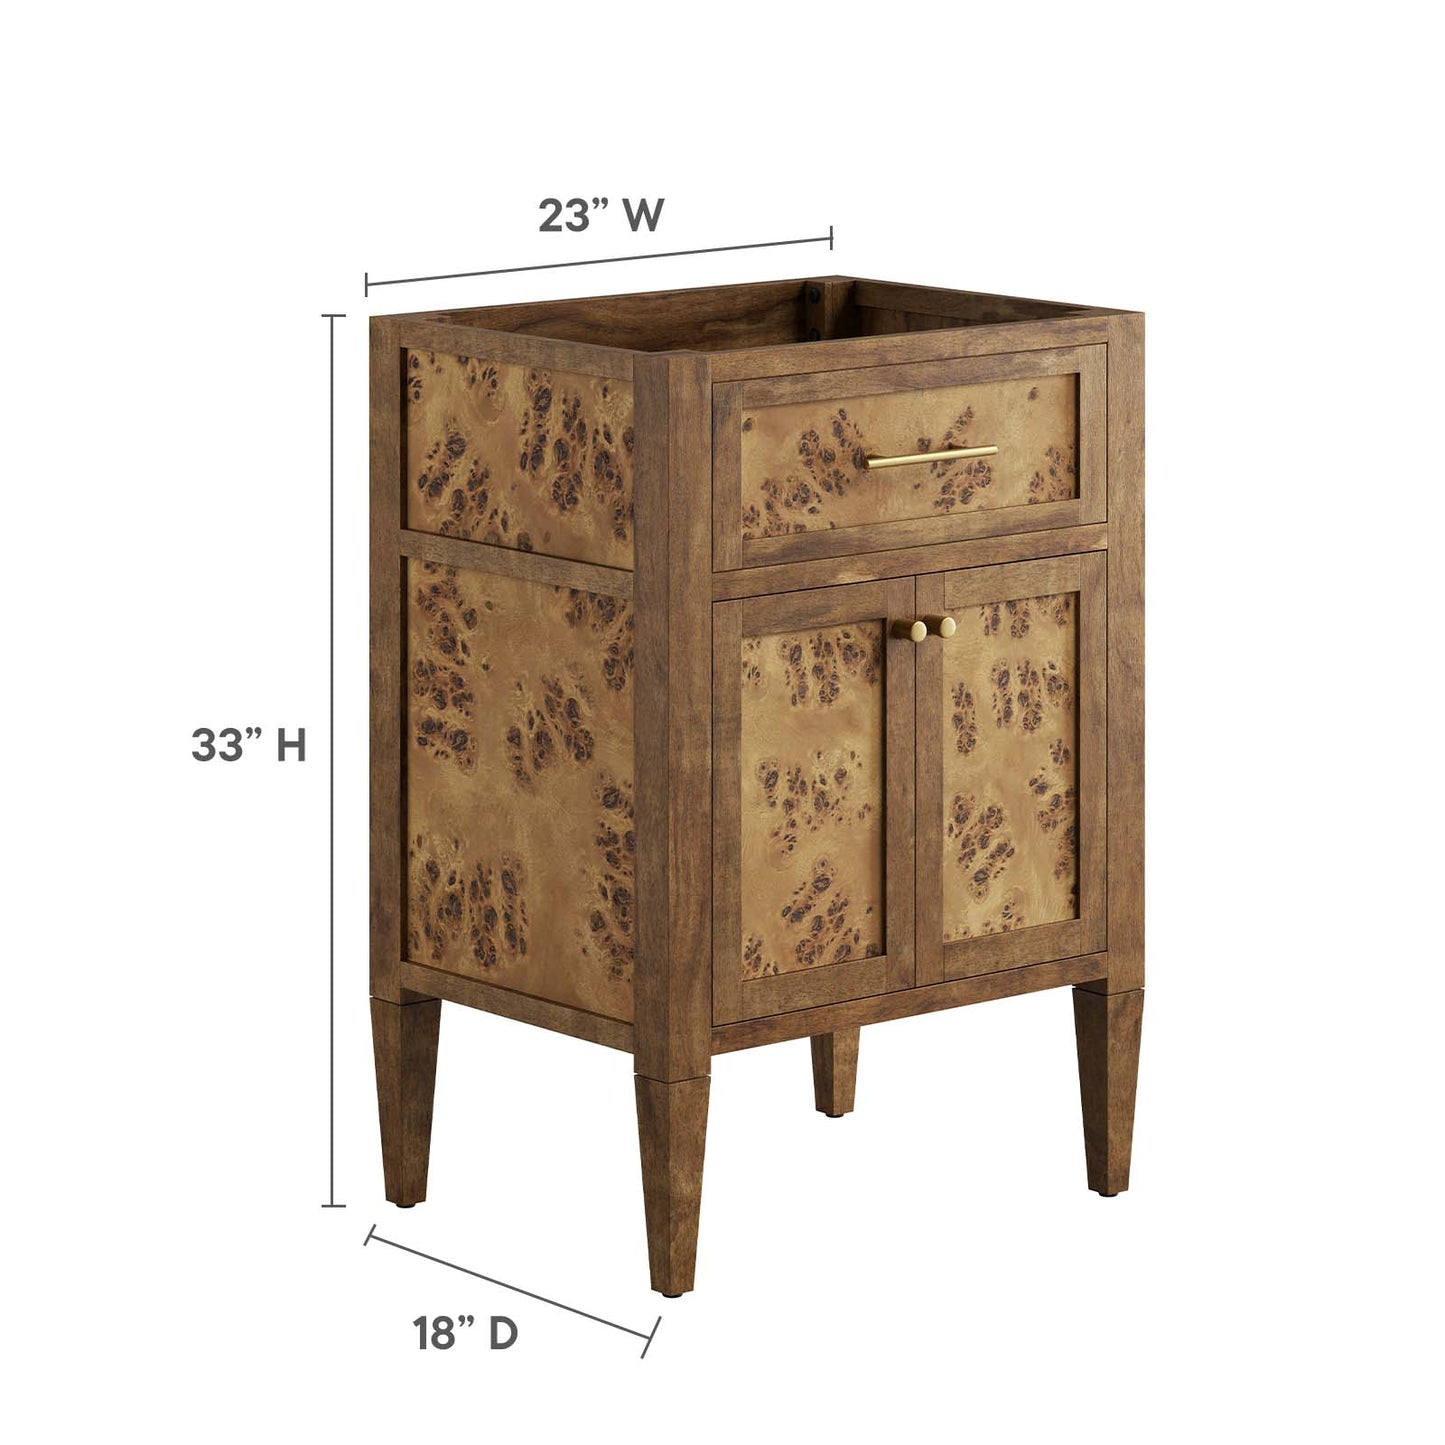 Elysian 24" Wood Bathroom Vanity Cabinet (Sink Basin Not Included) By Modway - EEI-6137 | Bathroom Accessories | Modway - 8